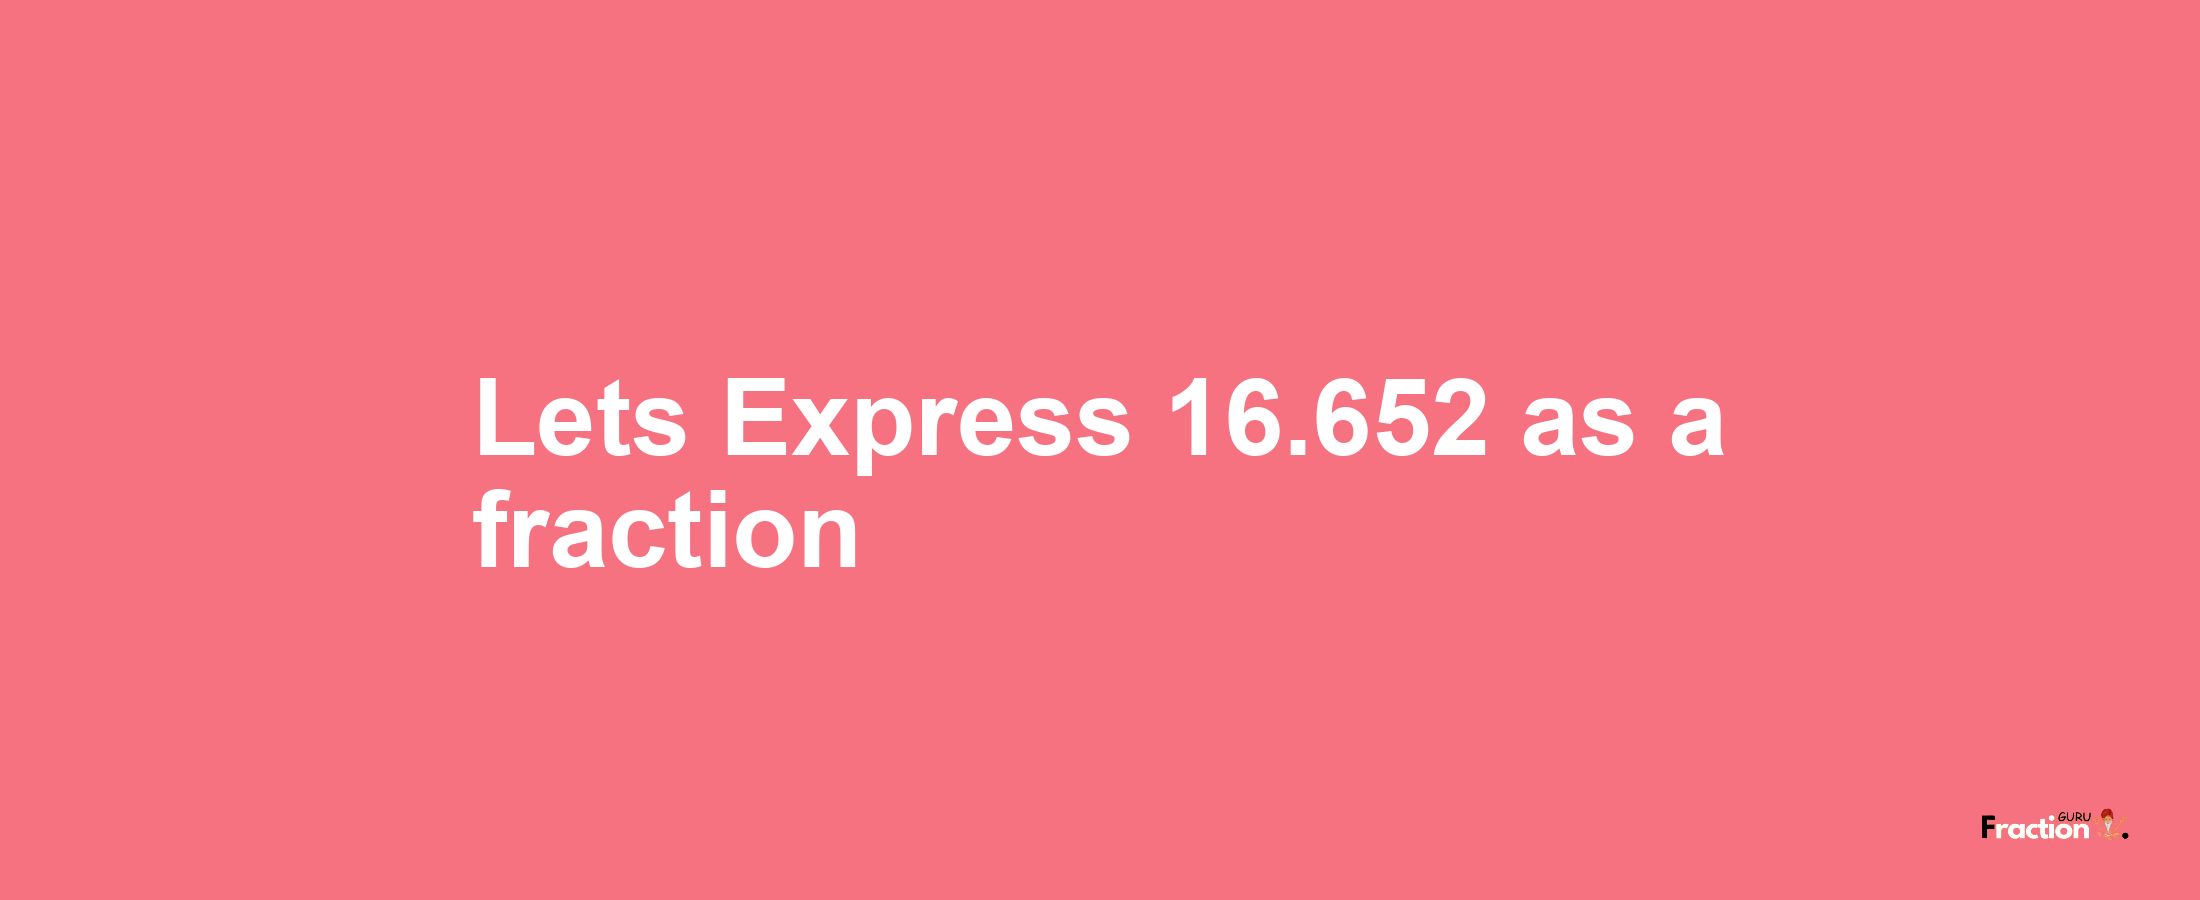 Lets Express 16.652 as afraction